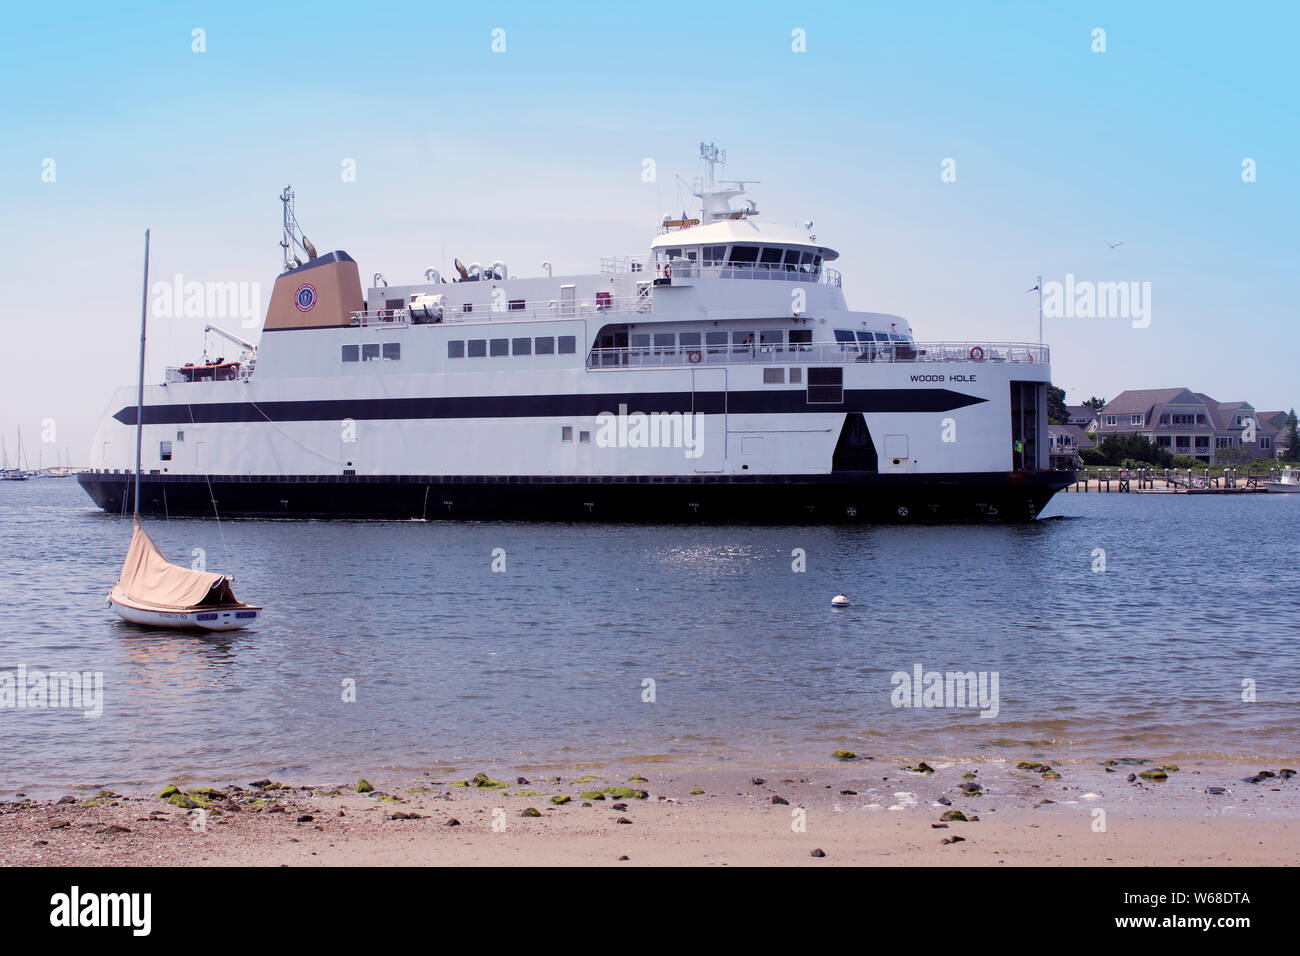 The Nantucket ferry 'Woods Hole' arriving in Hyannis Harbor, Massachusetts, USA Stock Photo